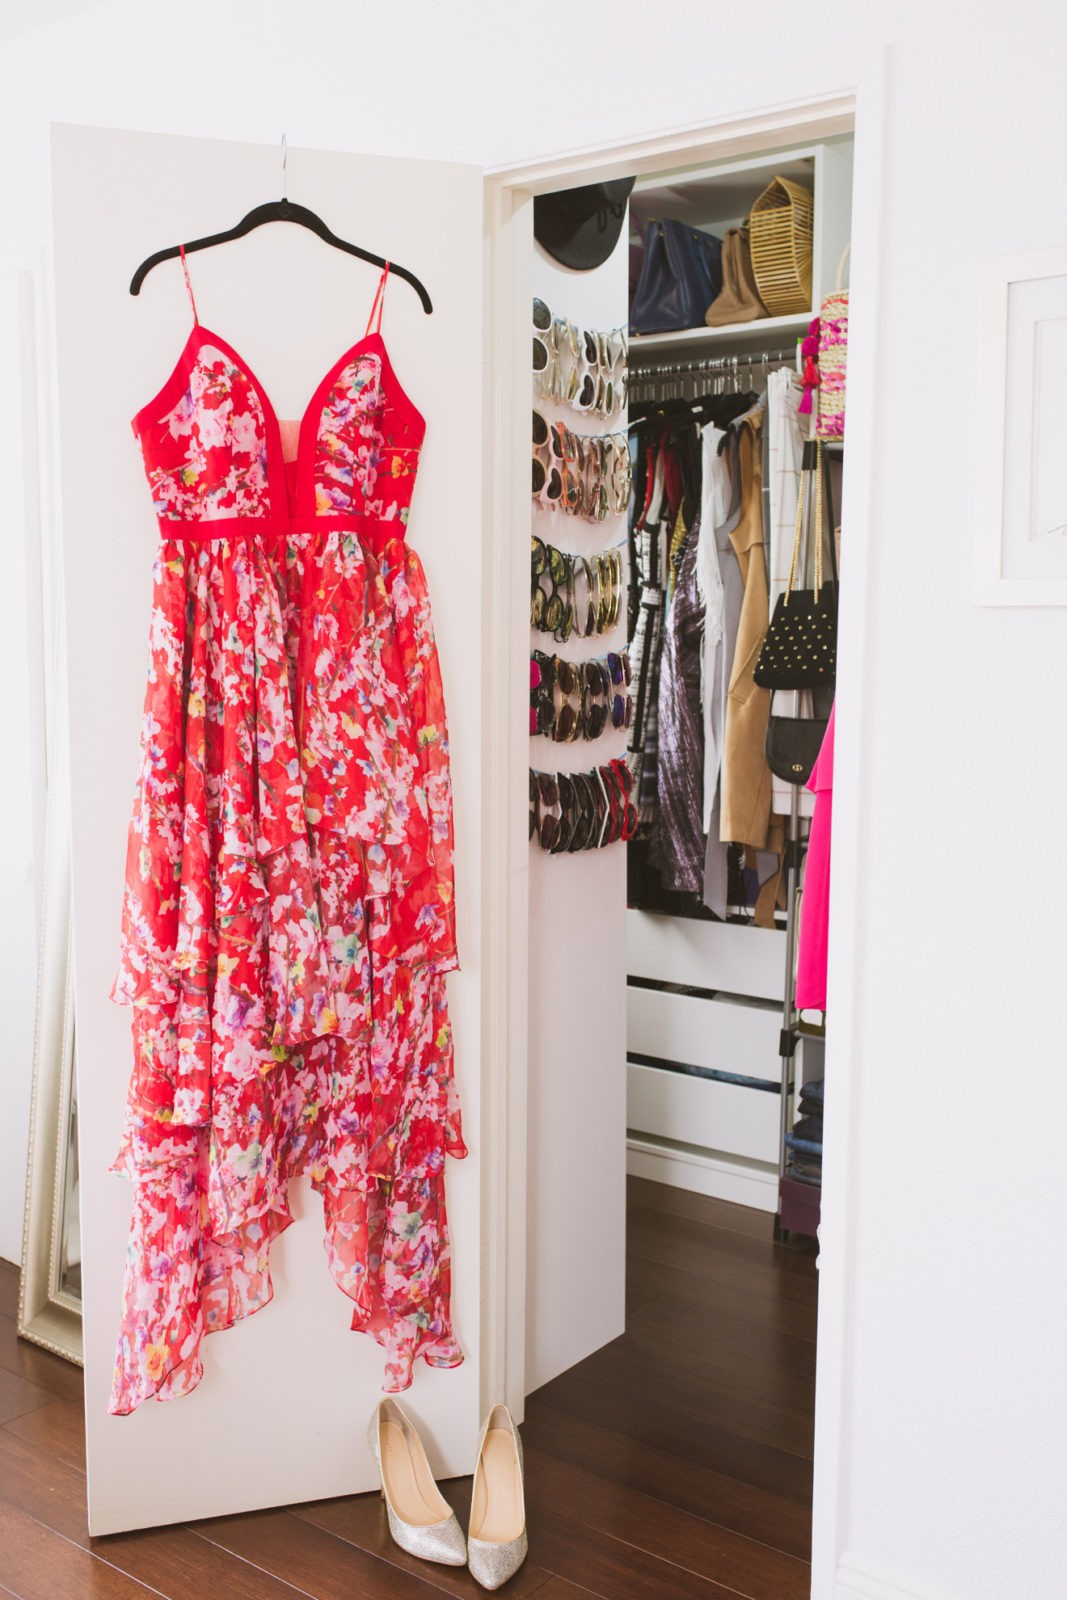 Closet Reveal and 10 Closet Organization Tips featured by Los Angeles fashion blogger, Laura Lilly